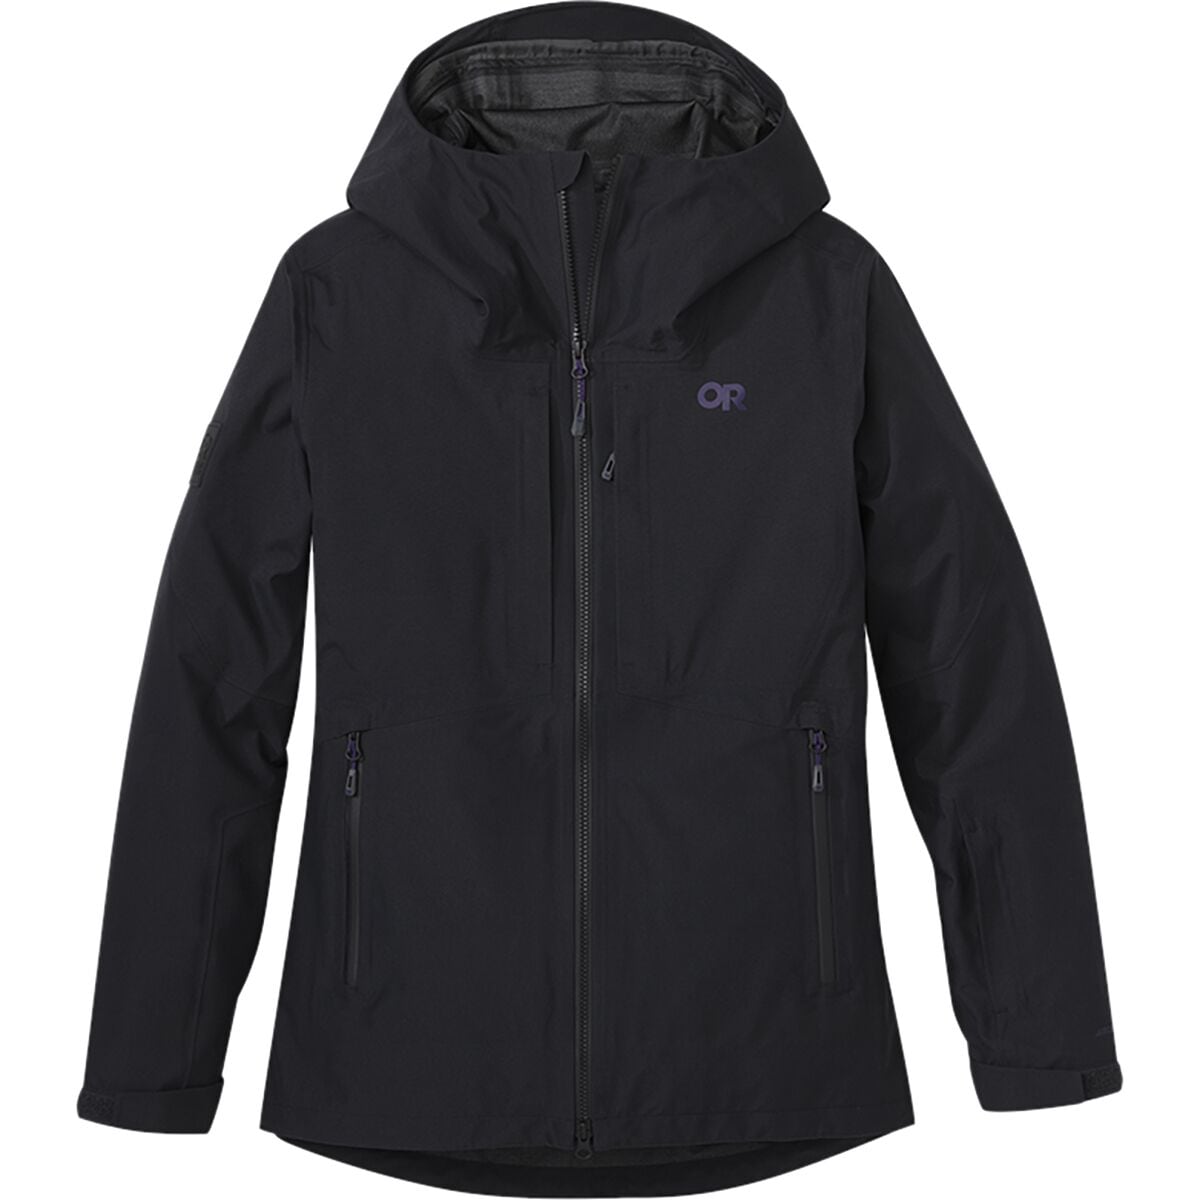 Outdoor Research Skytour AscentShell Jacket - Women's Black